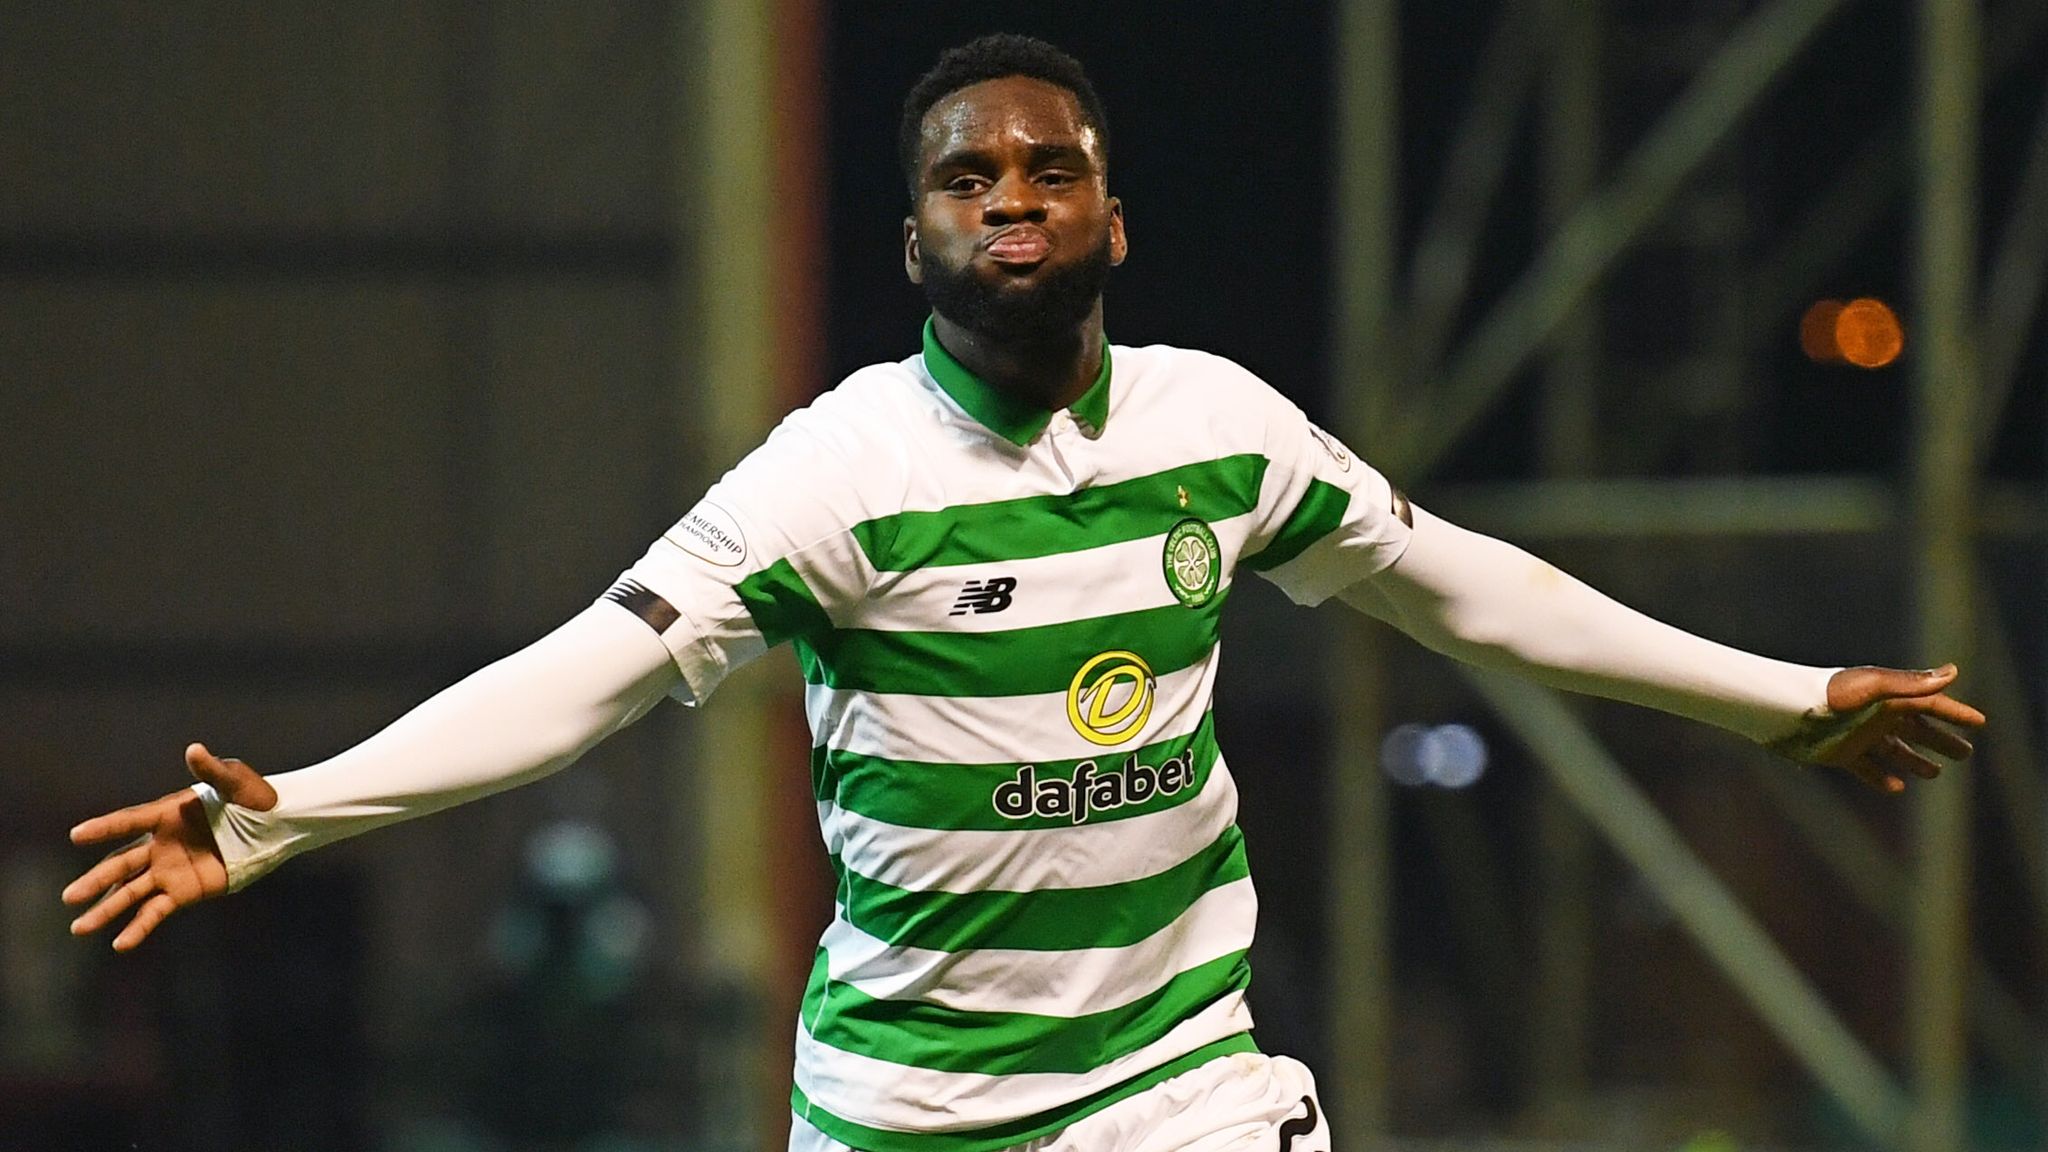 Celtic are about to offer 'brilliant' 22-year-old player a new contract -  journalist